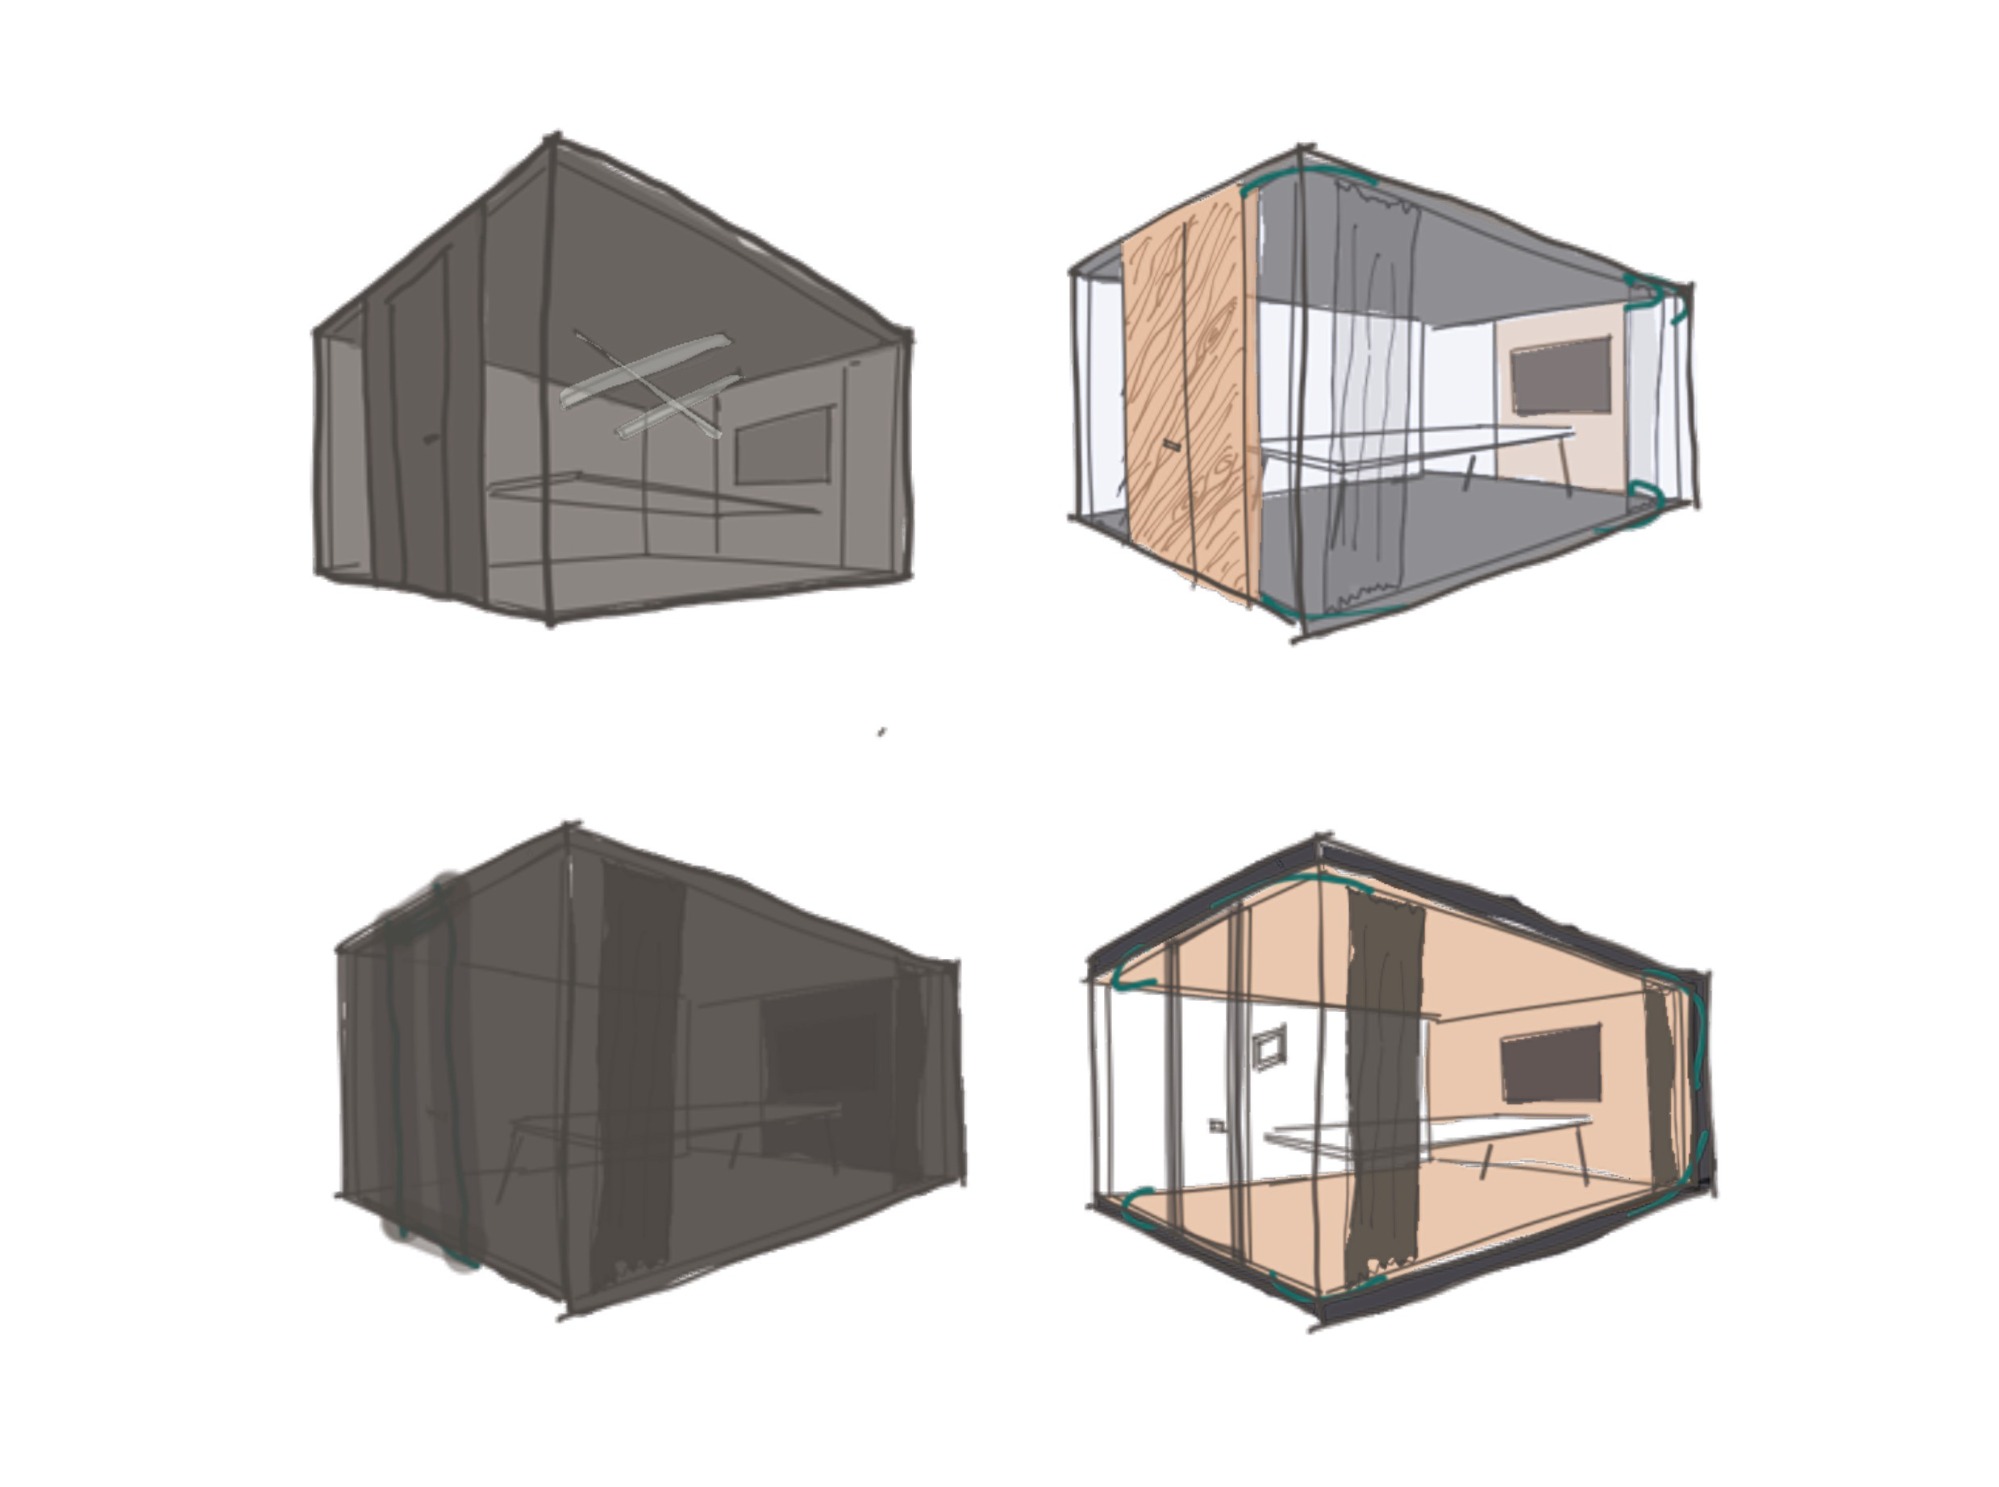  Initial drafts of the design of the OASIS meeting room by Reaktor architectural studio.